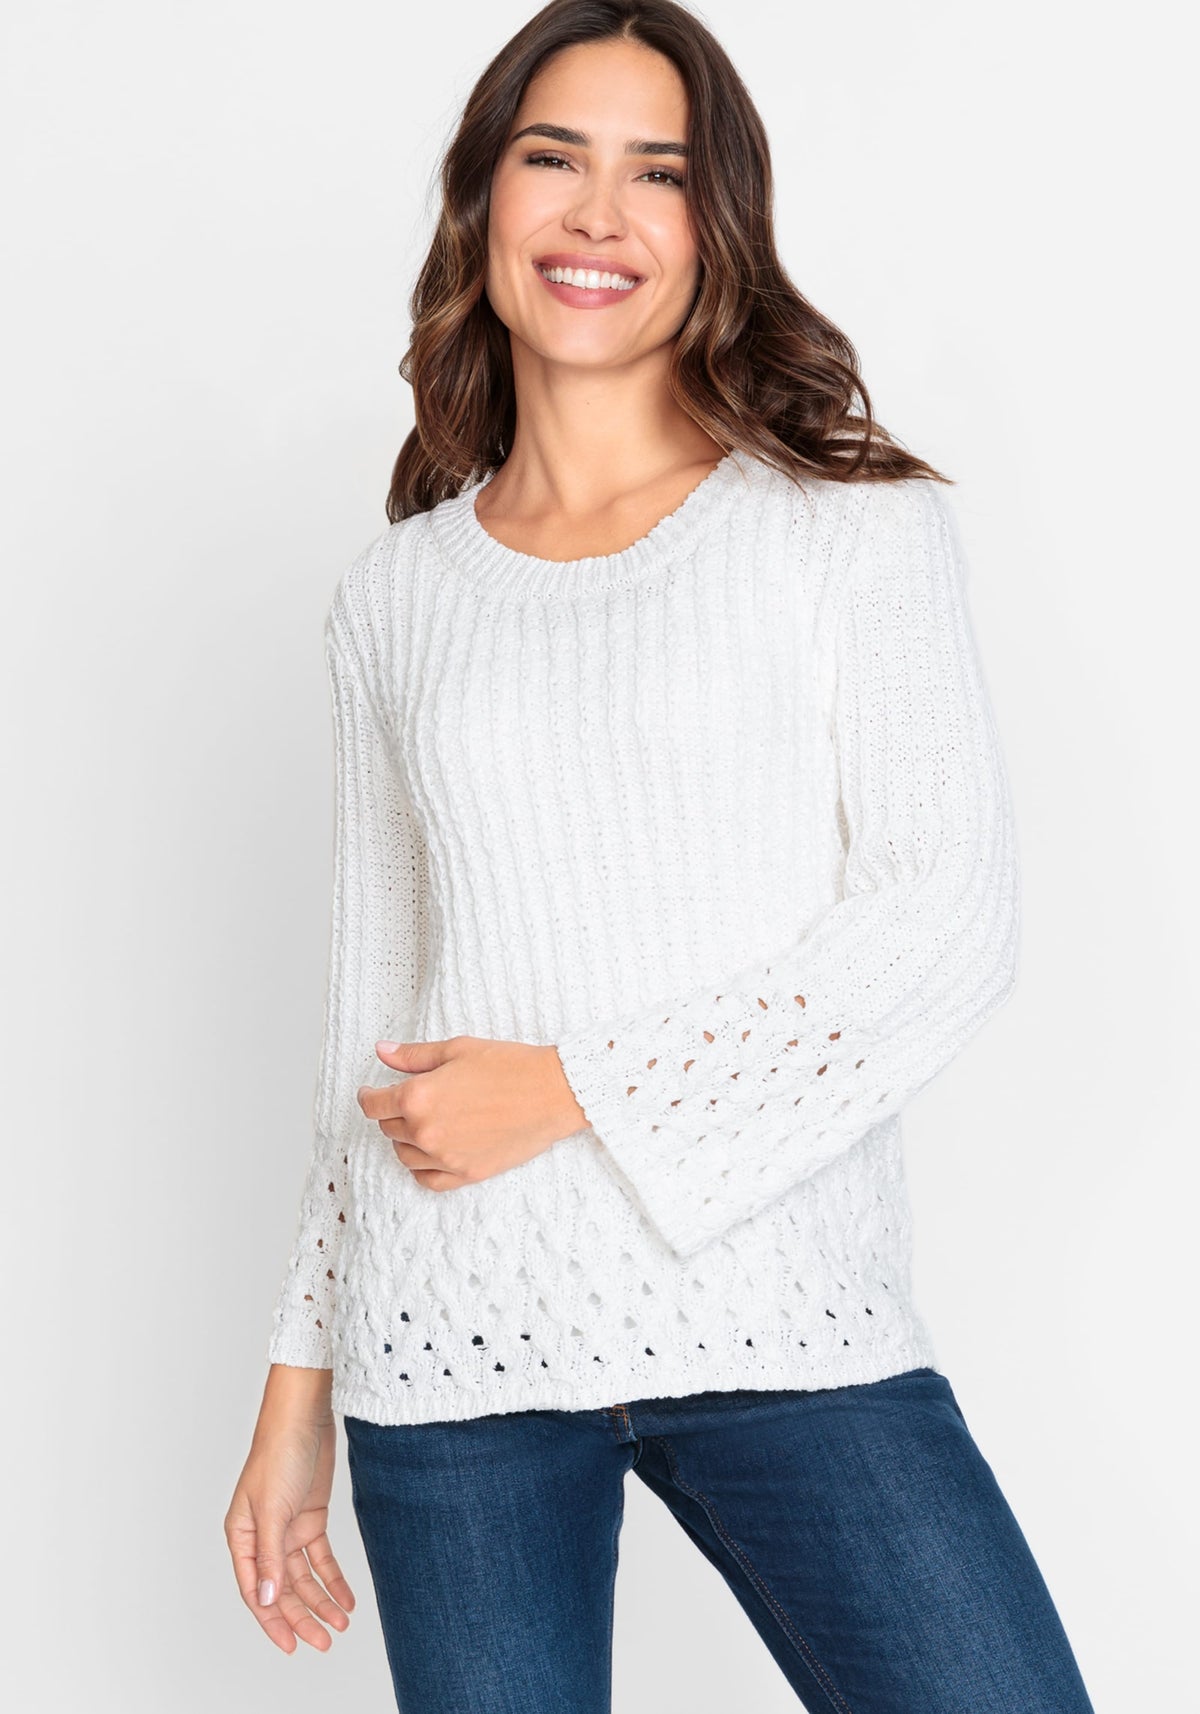 Cotton Blend 3/4 Sleeve Pullover